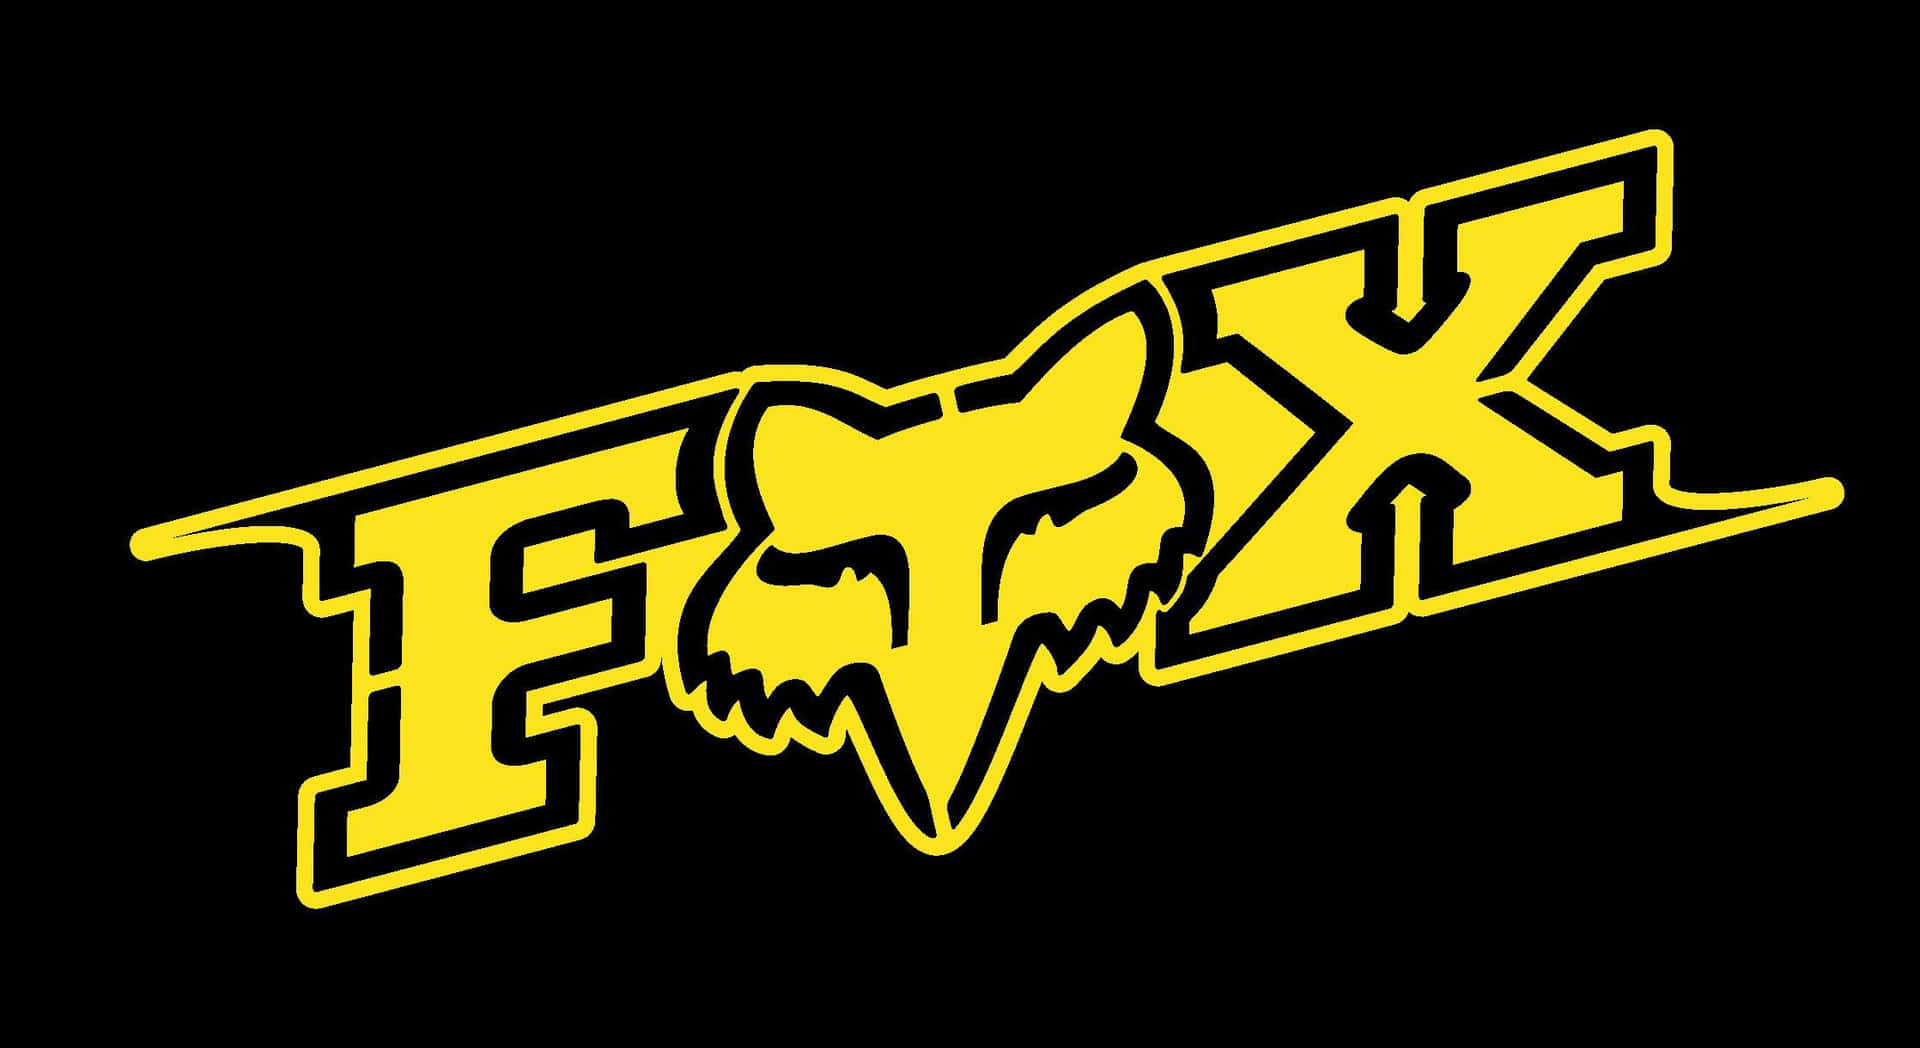 Conquer any terrain with Fox Racing gear Wallpaper